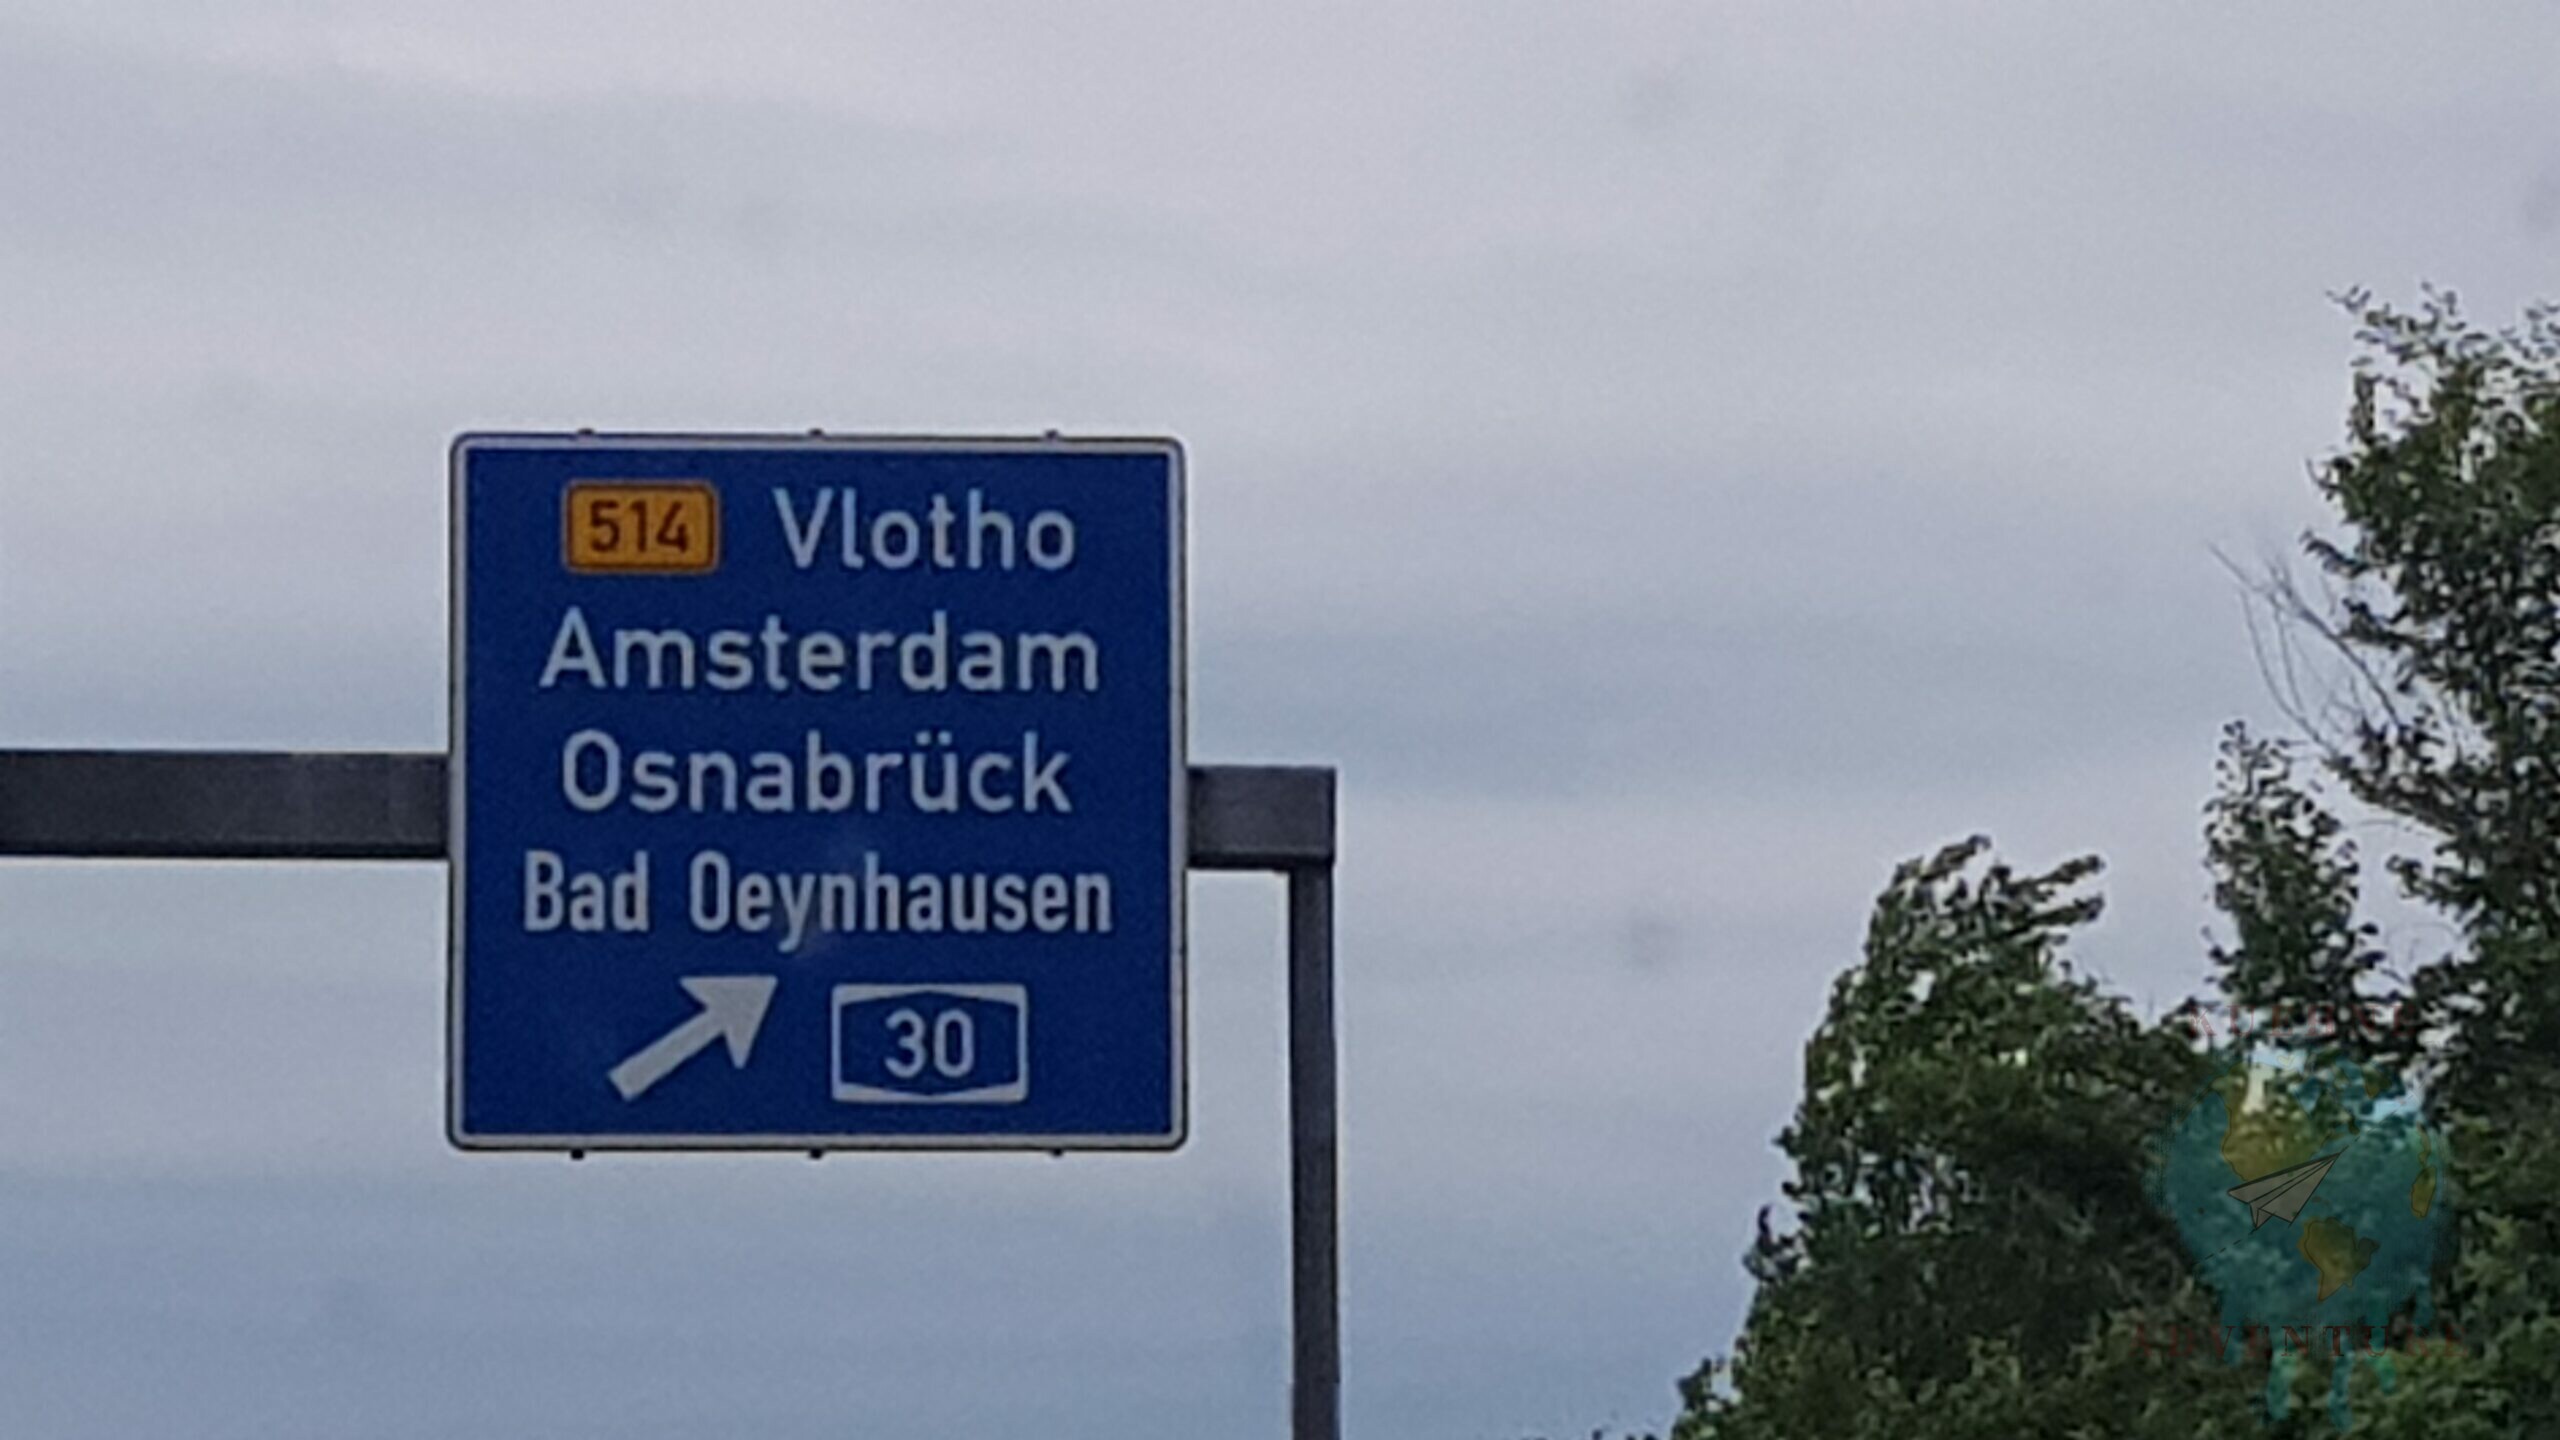 Amsterdam in May 2019